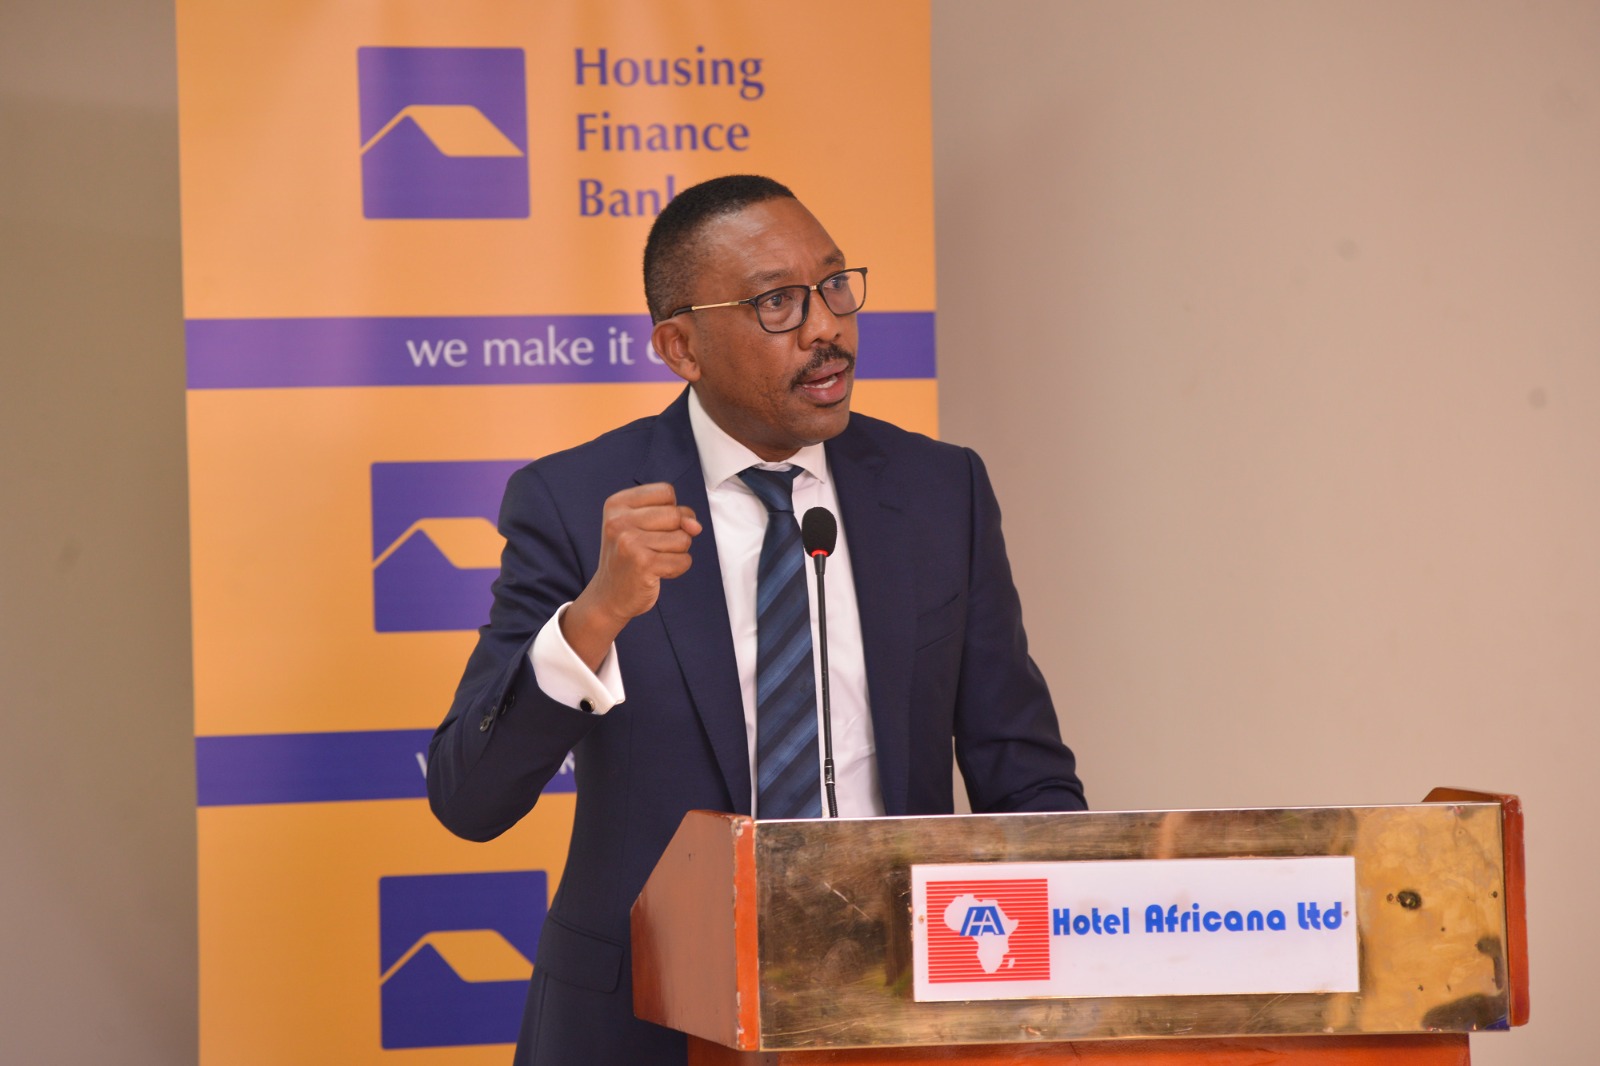 Housing Finance Bank reaffirms support to business community at contractors forum